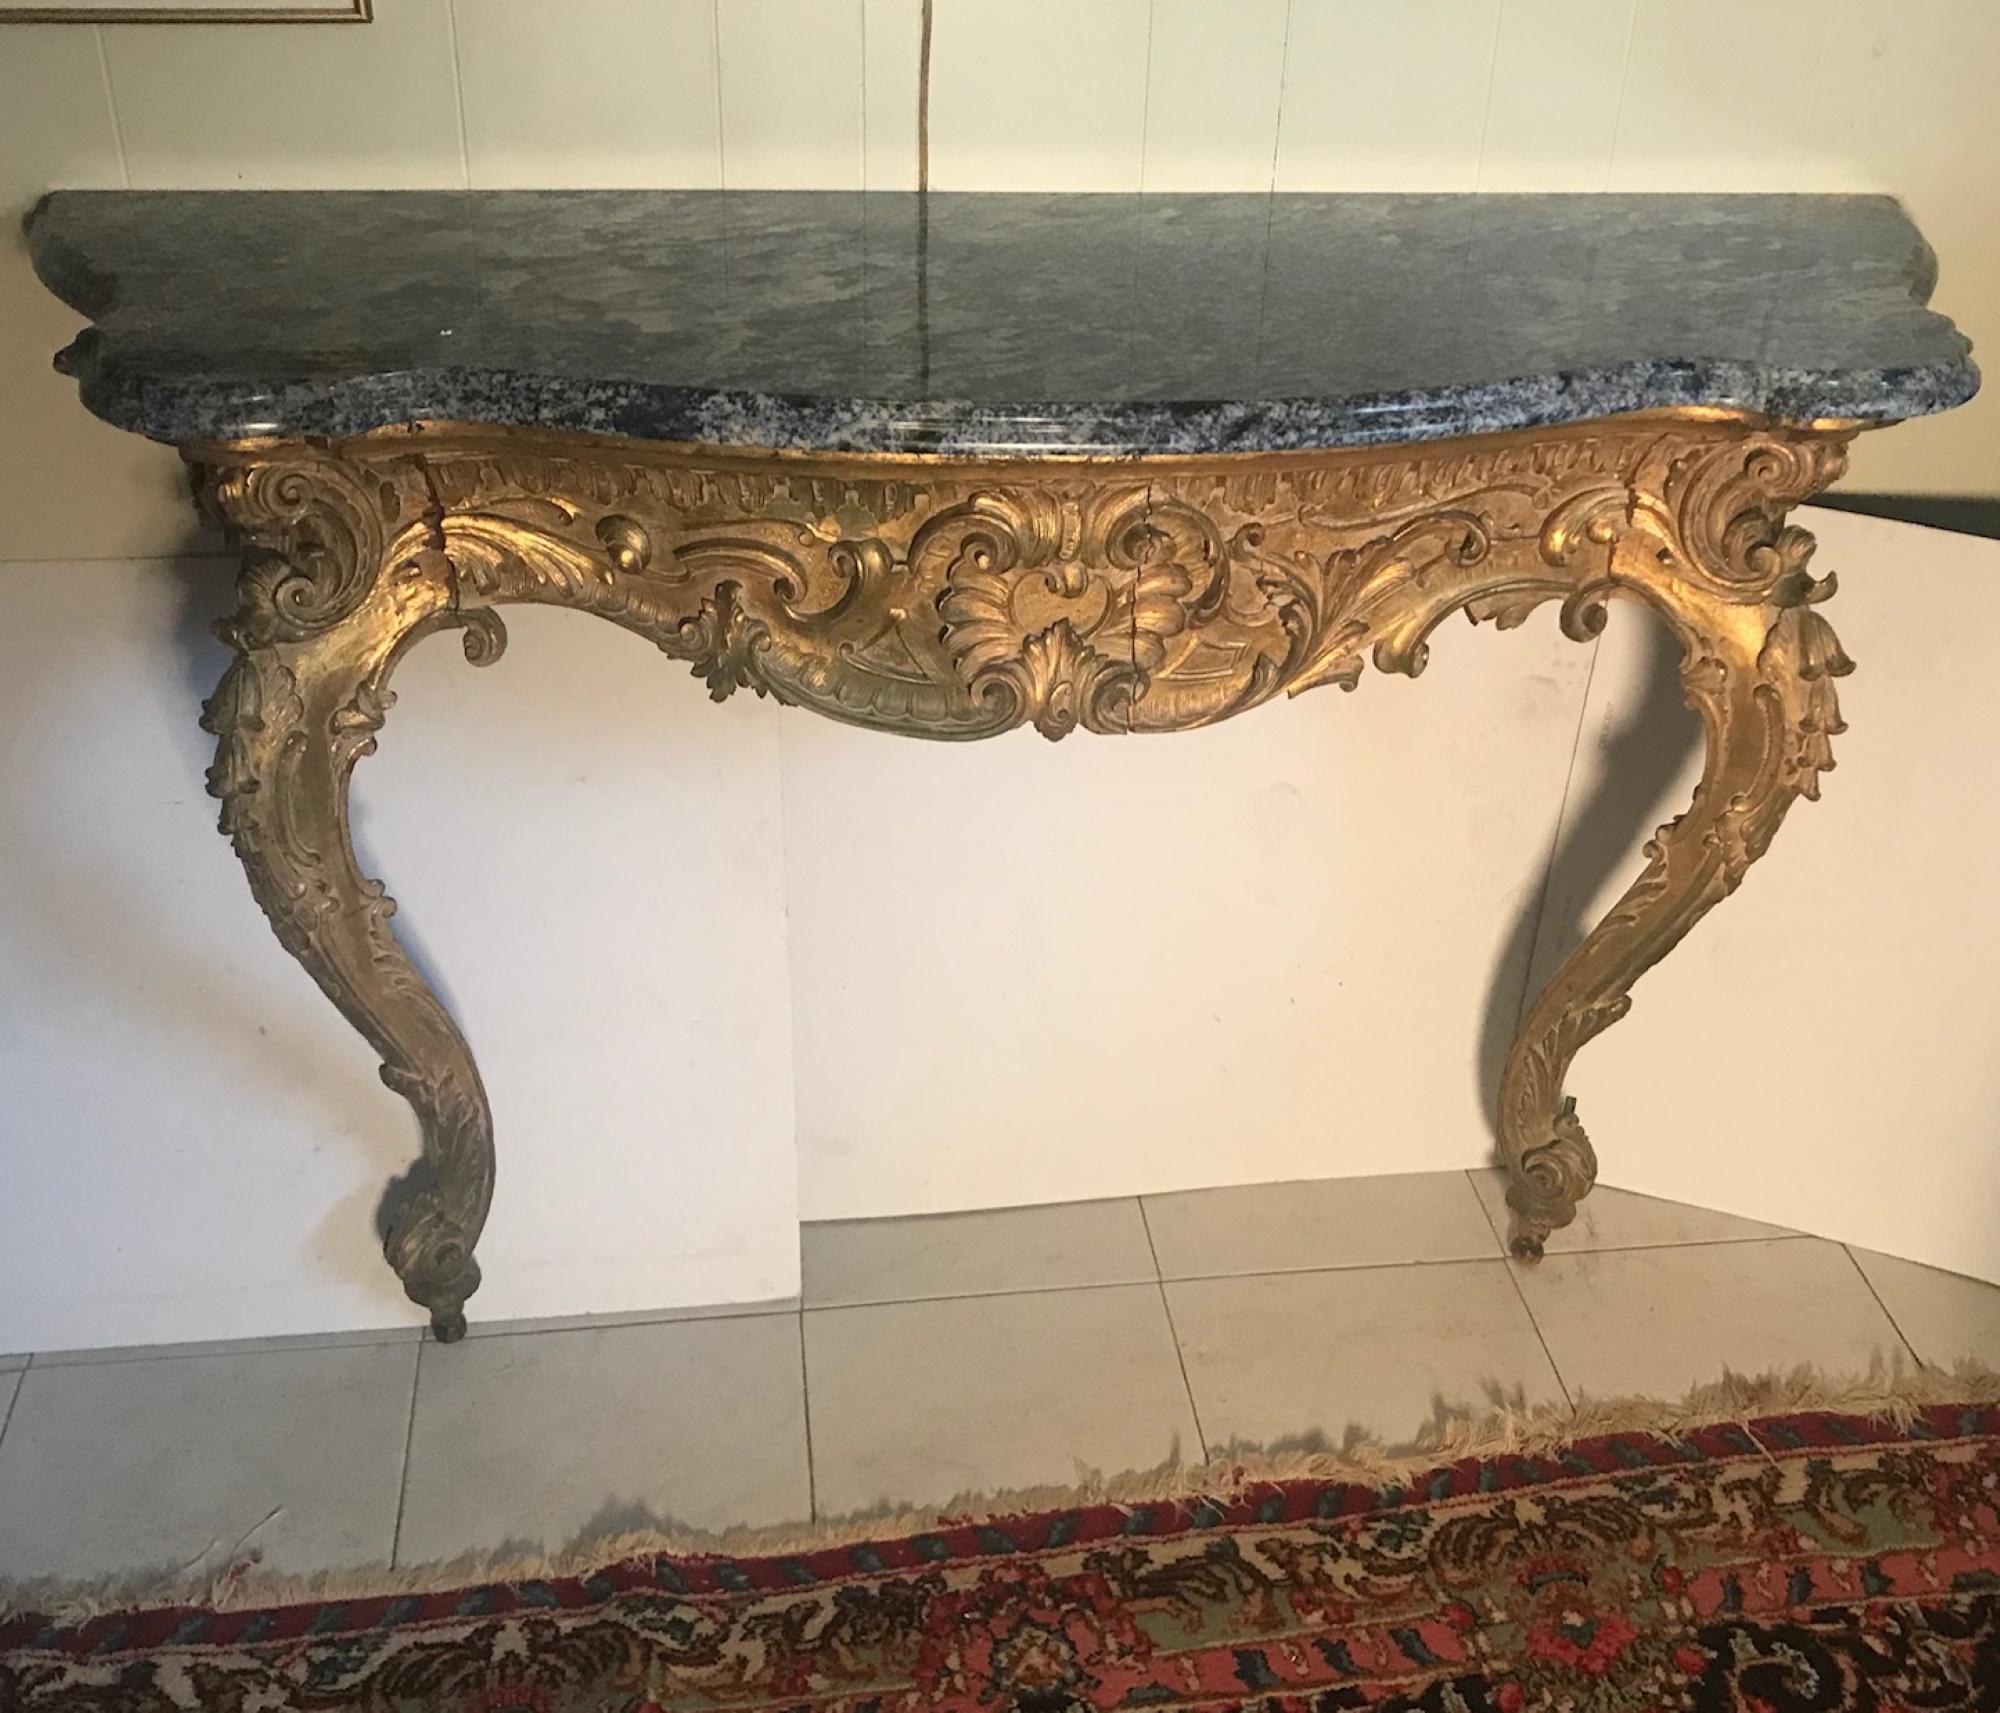 Antique 18th century French Baroque carved giltwood and marble console, circa 1790

This magnificent and elegant denim lapis marble granite top console table is beautifully carved from mahogany wood and gilded. The console is raised on two thick